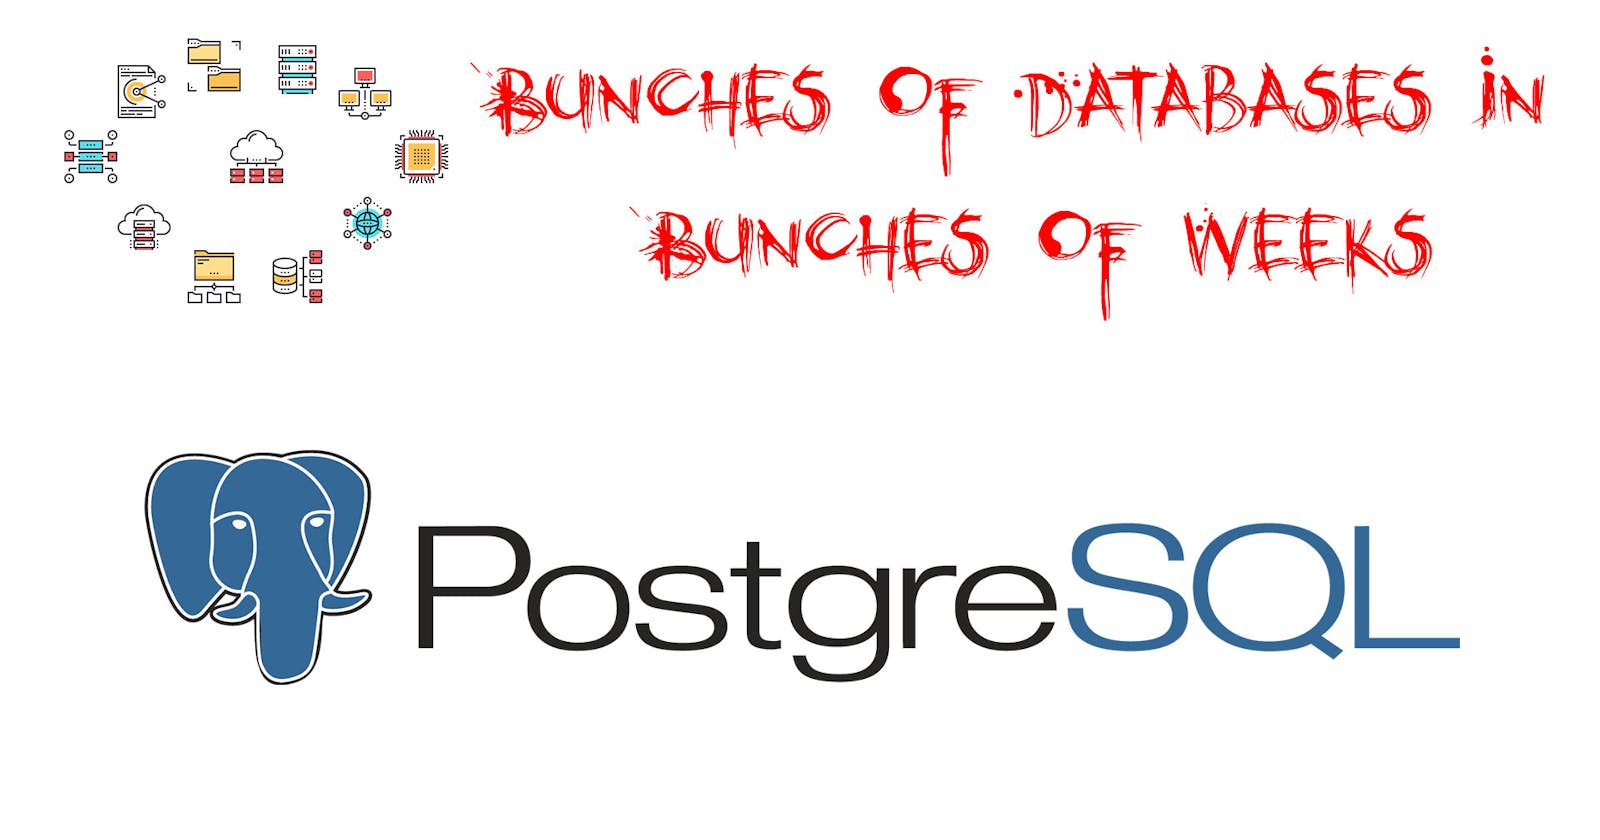 PostgreSQL Dev Setup and Installation in "Bunches of Databases in Bunches of Weeks"